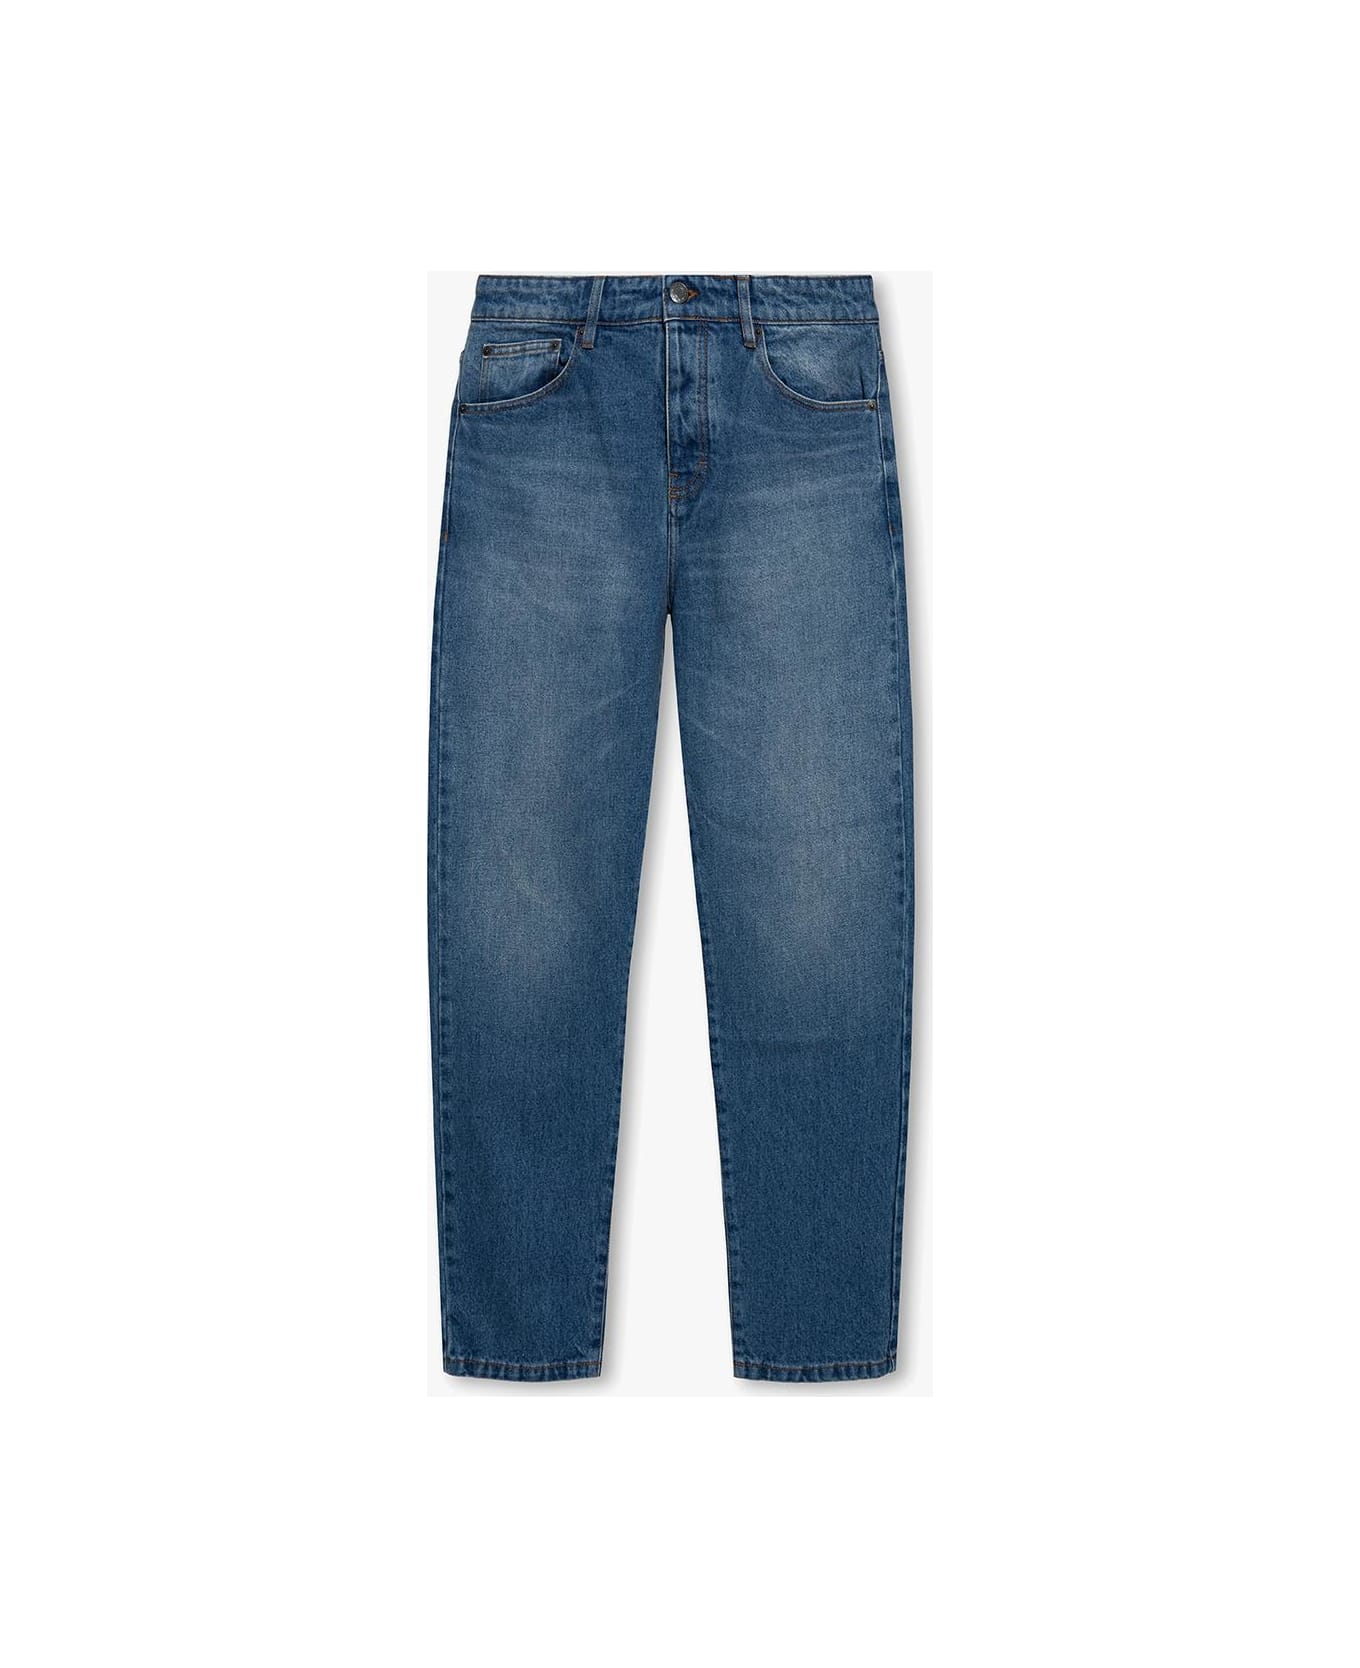 Ami Alexandre Mattiussi Jean With Slightly Tapered Legs - BLUE